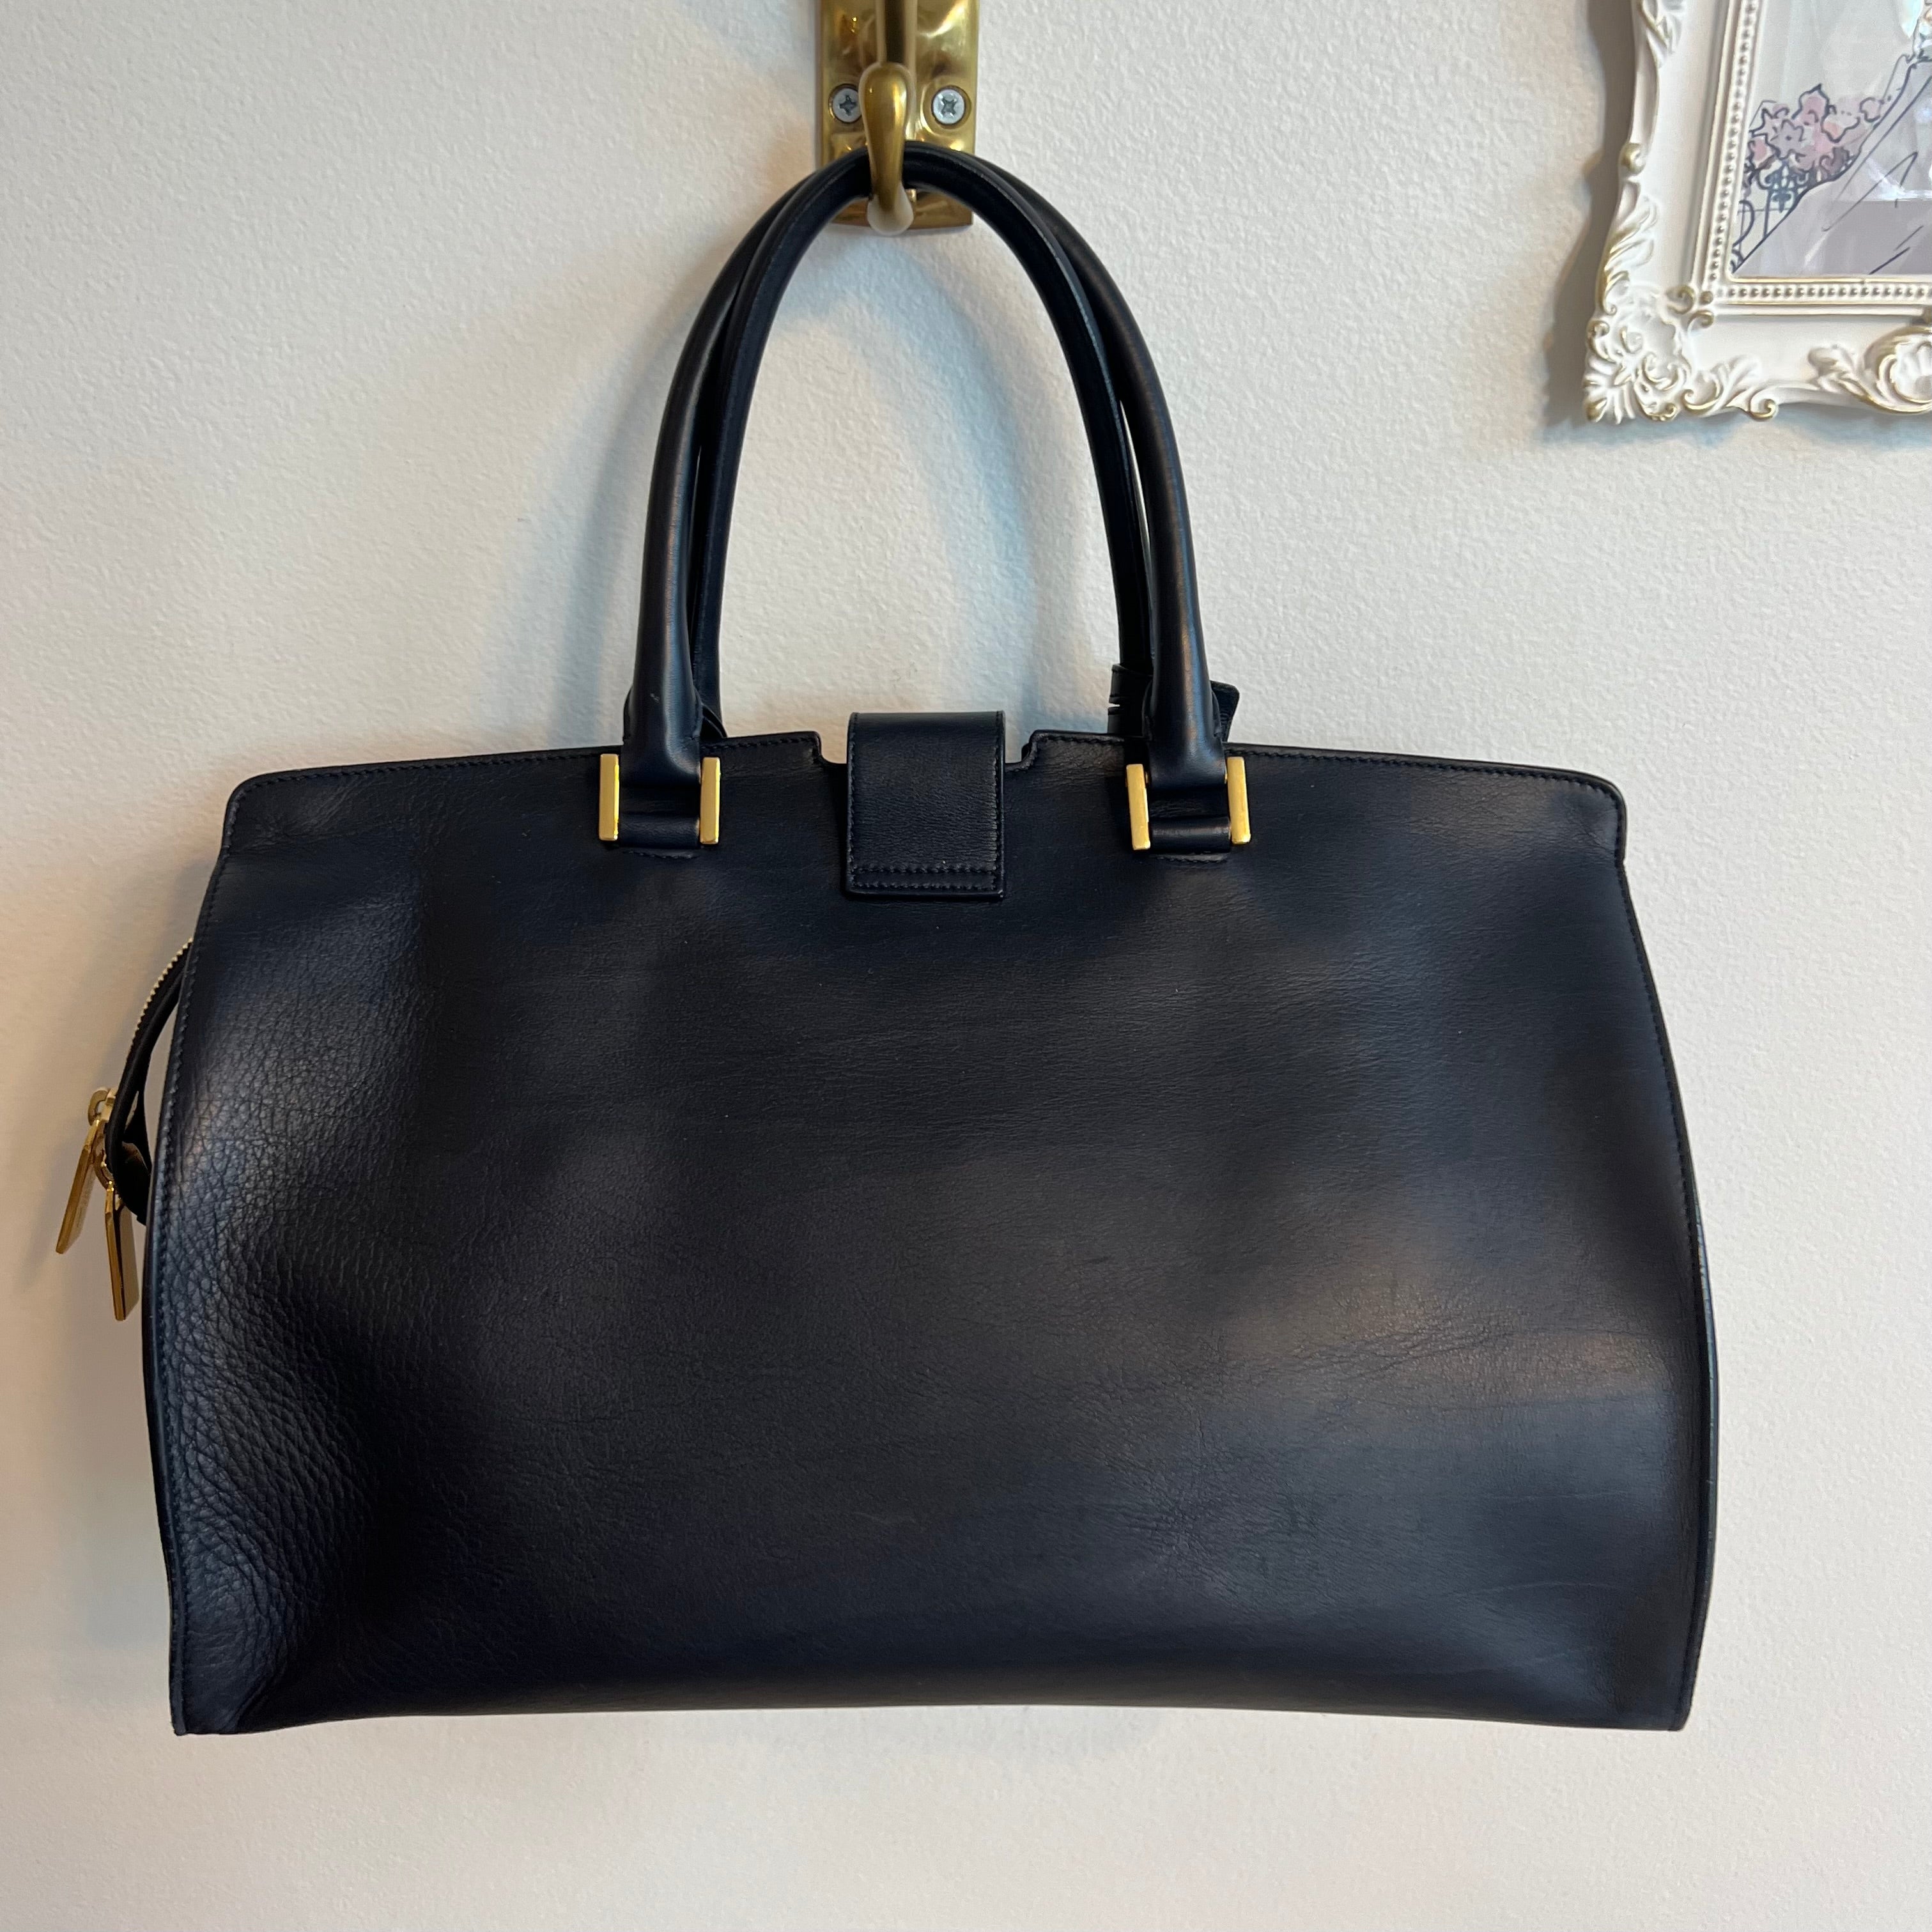 Pre-Owned YVES SAINT LAURENT Navy Leather Cabas Chyc Medium Tote